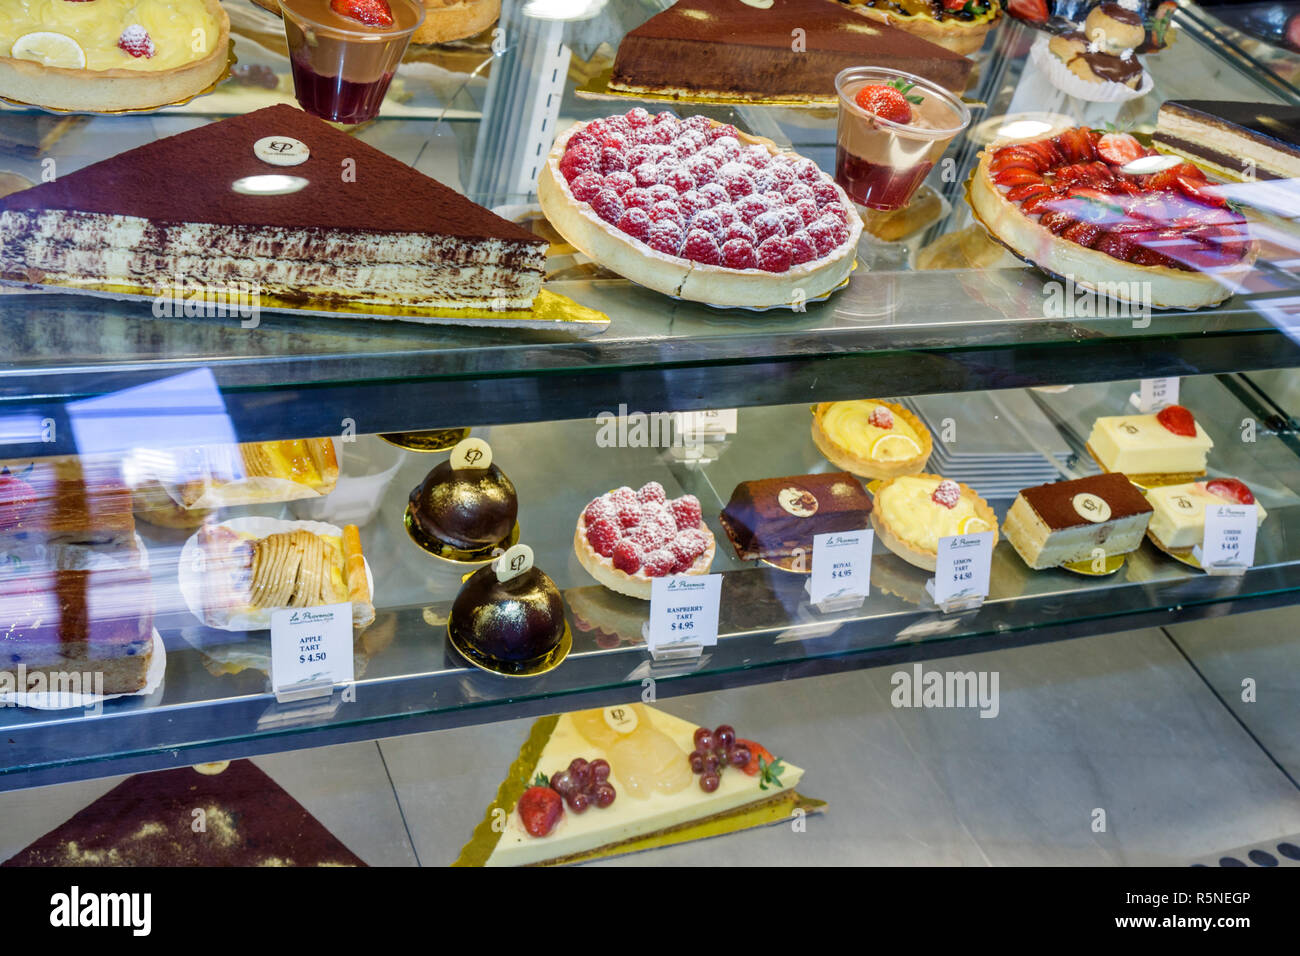 Miami Florida,Coral Gables,La Provence,Artisanal French Bakery and  Cafe,sweets,dessert,pastry,pastries,fruit fruits tart,cake,retail  products,display Stock Photo - Alamy